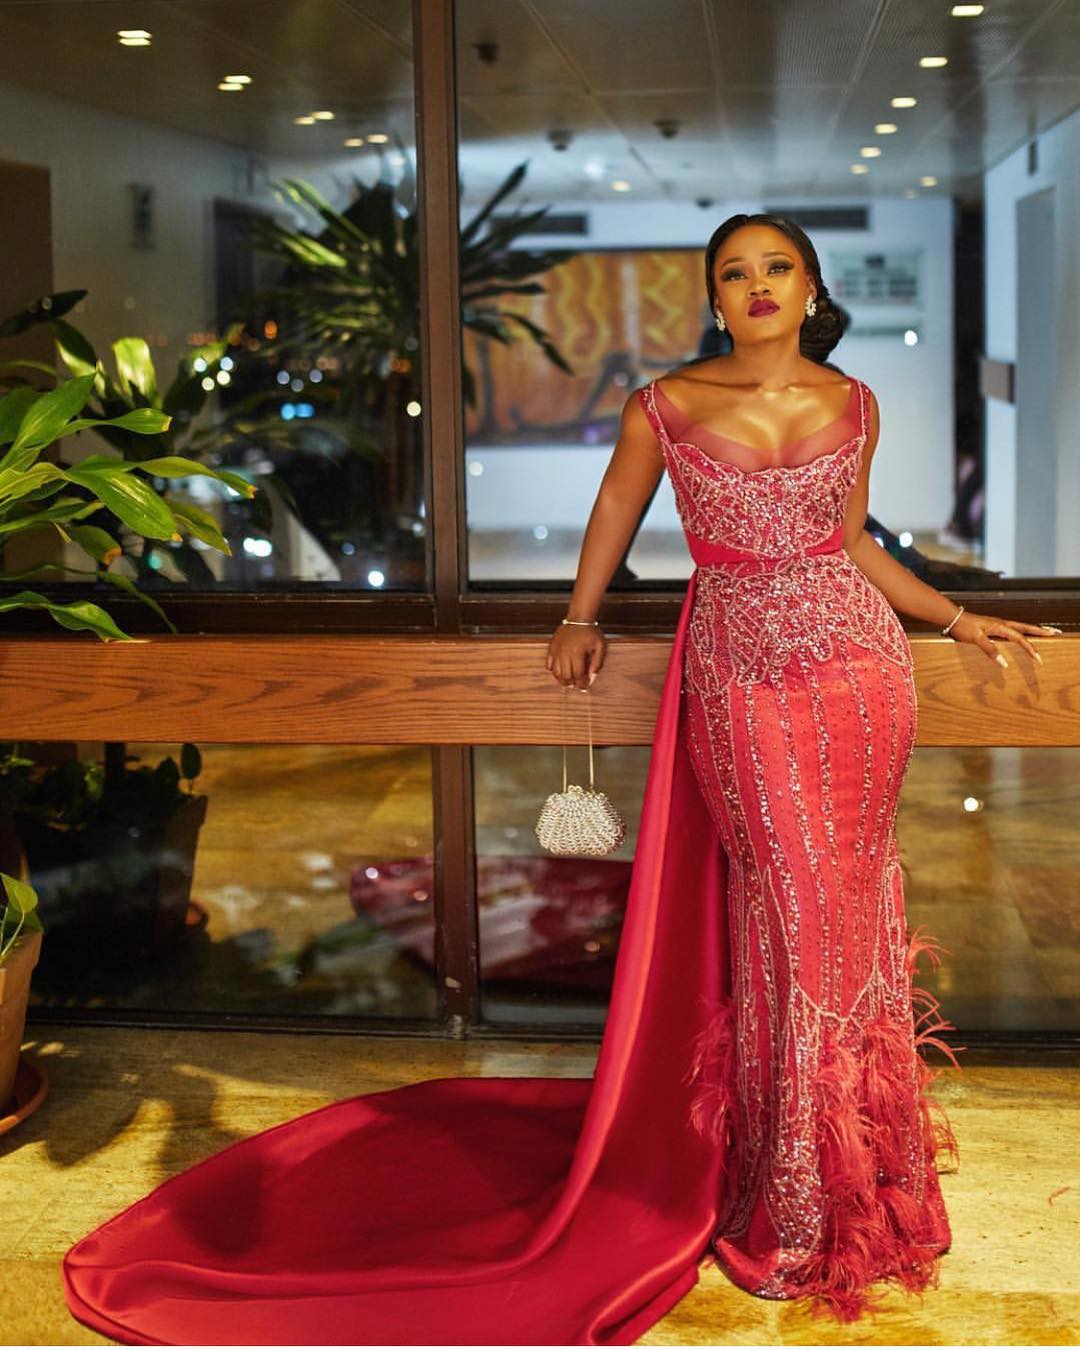 Hands Down CeeC Won Red Carpet Style At #AMVCA2018